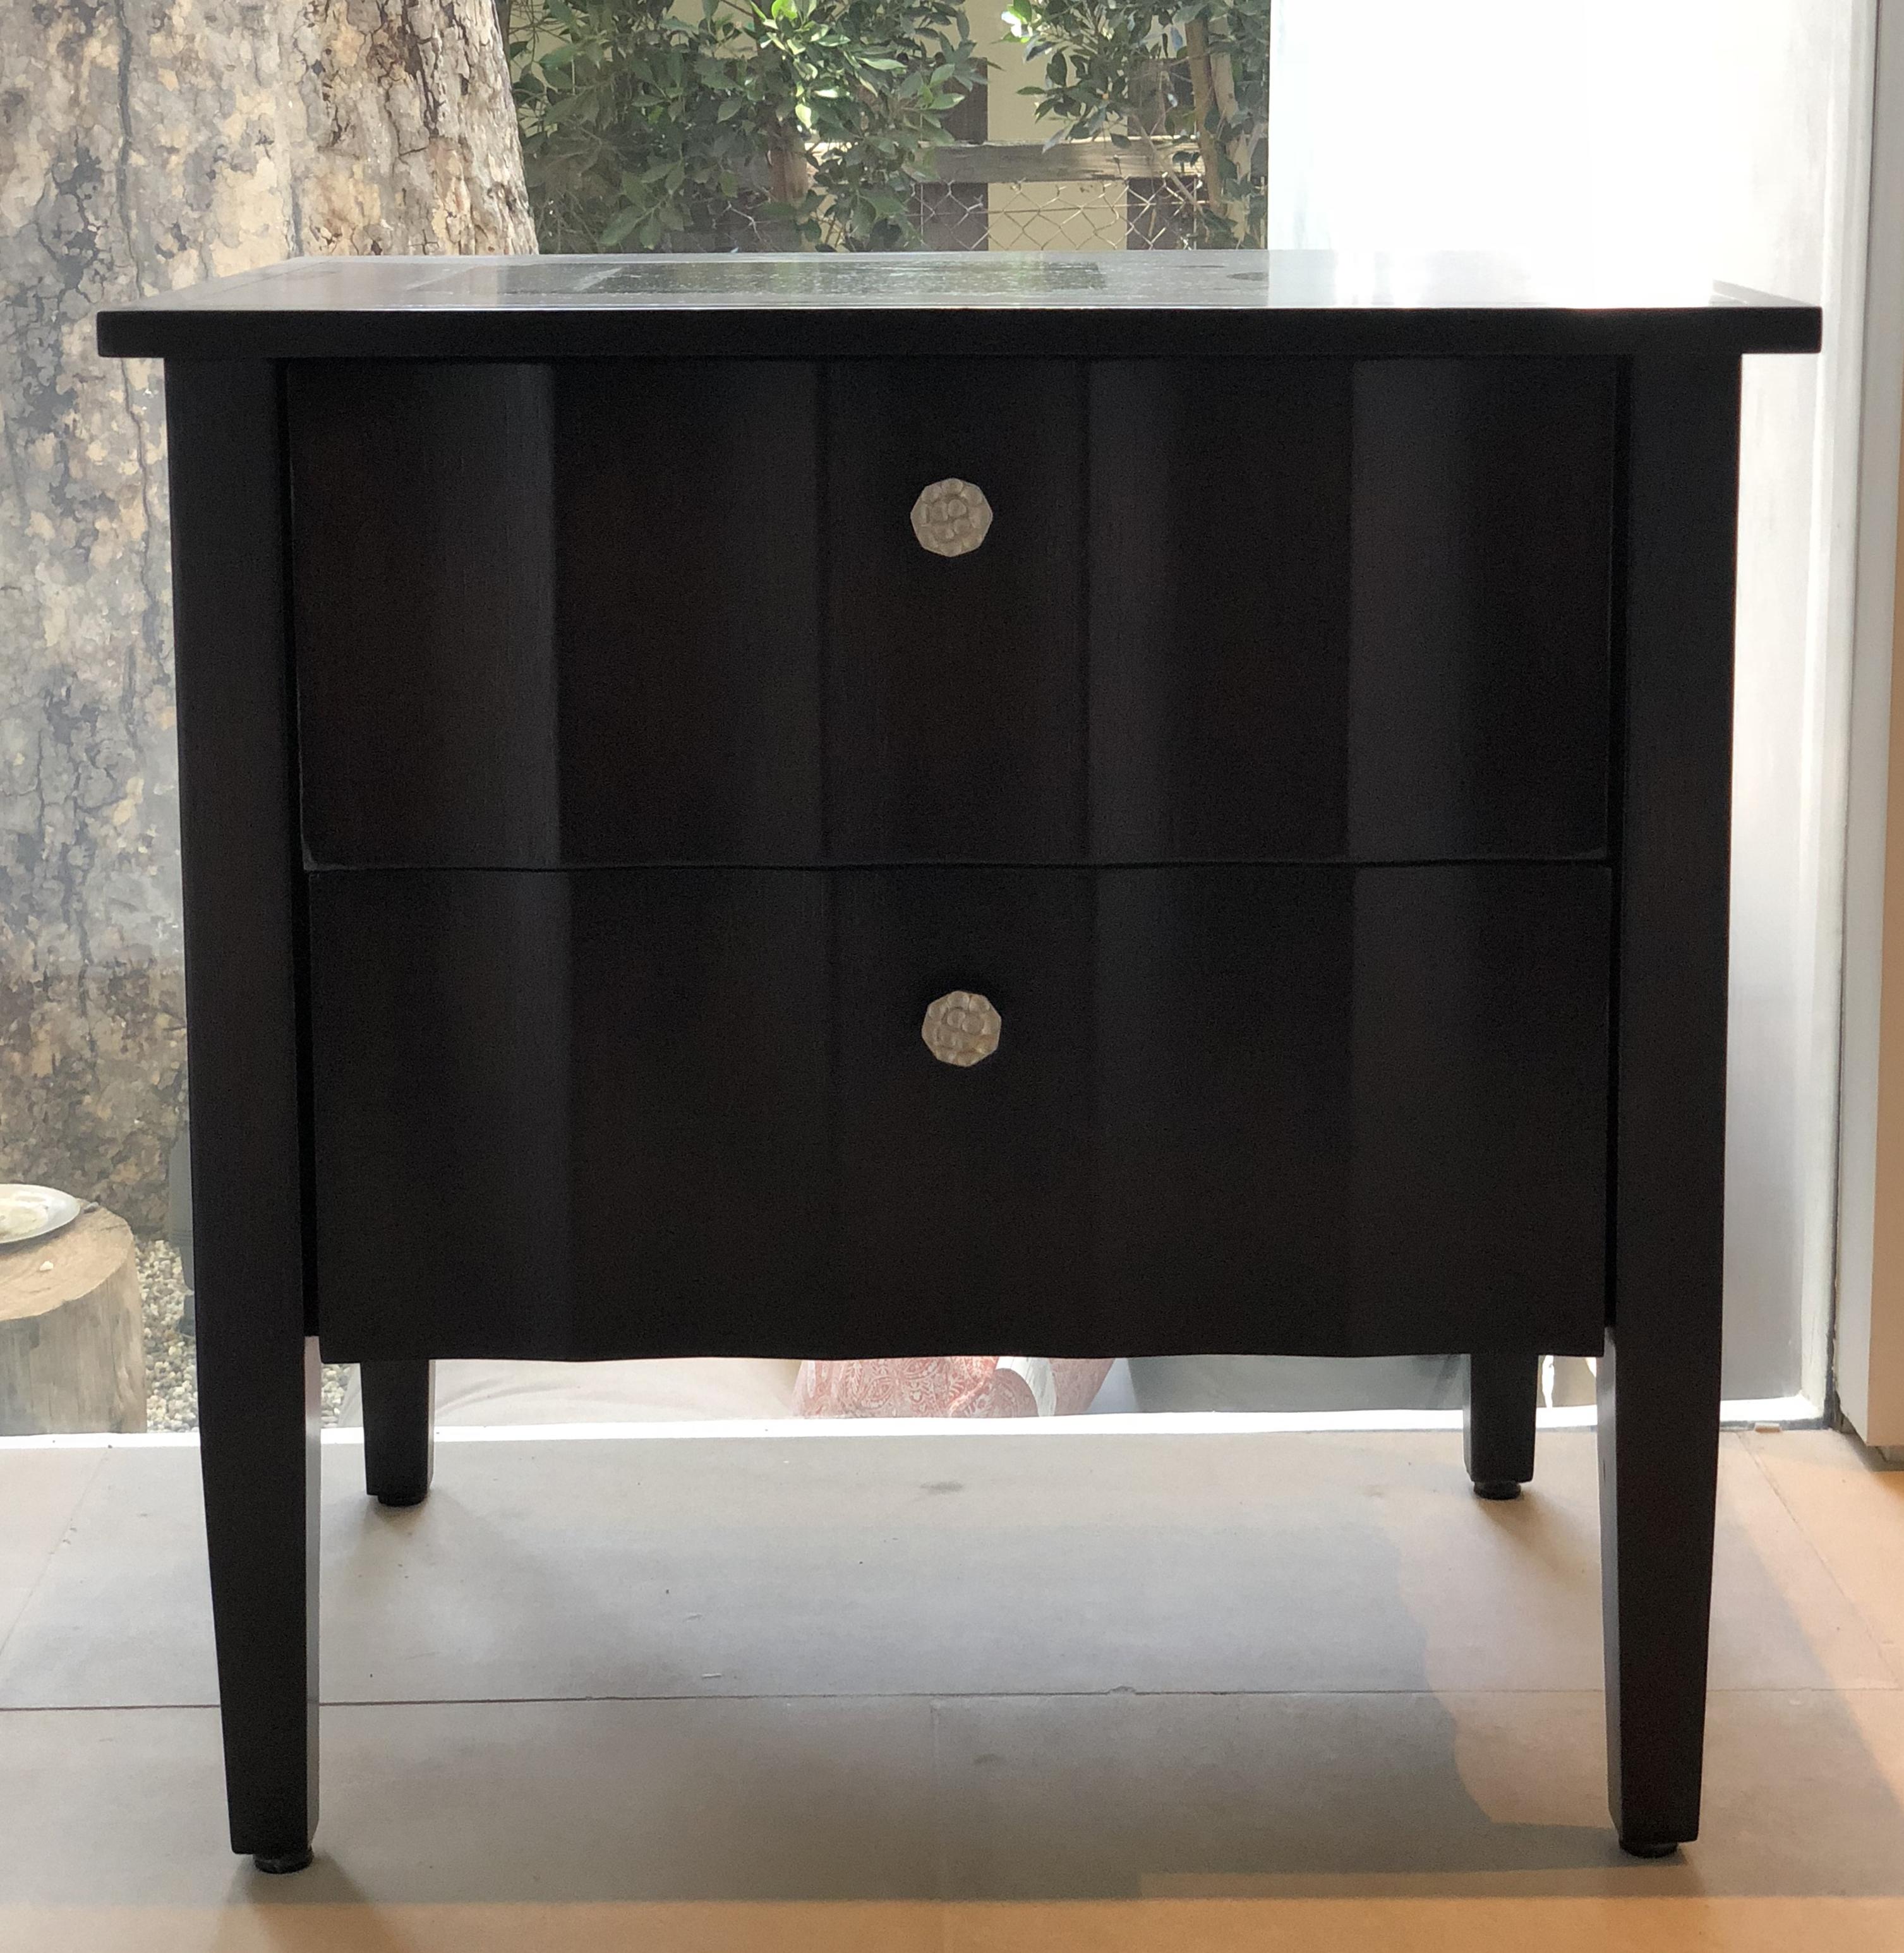 American Modern Chocolate Brown Nightstands with Scalloped Detail on Drawers and Sides